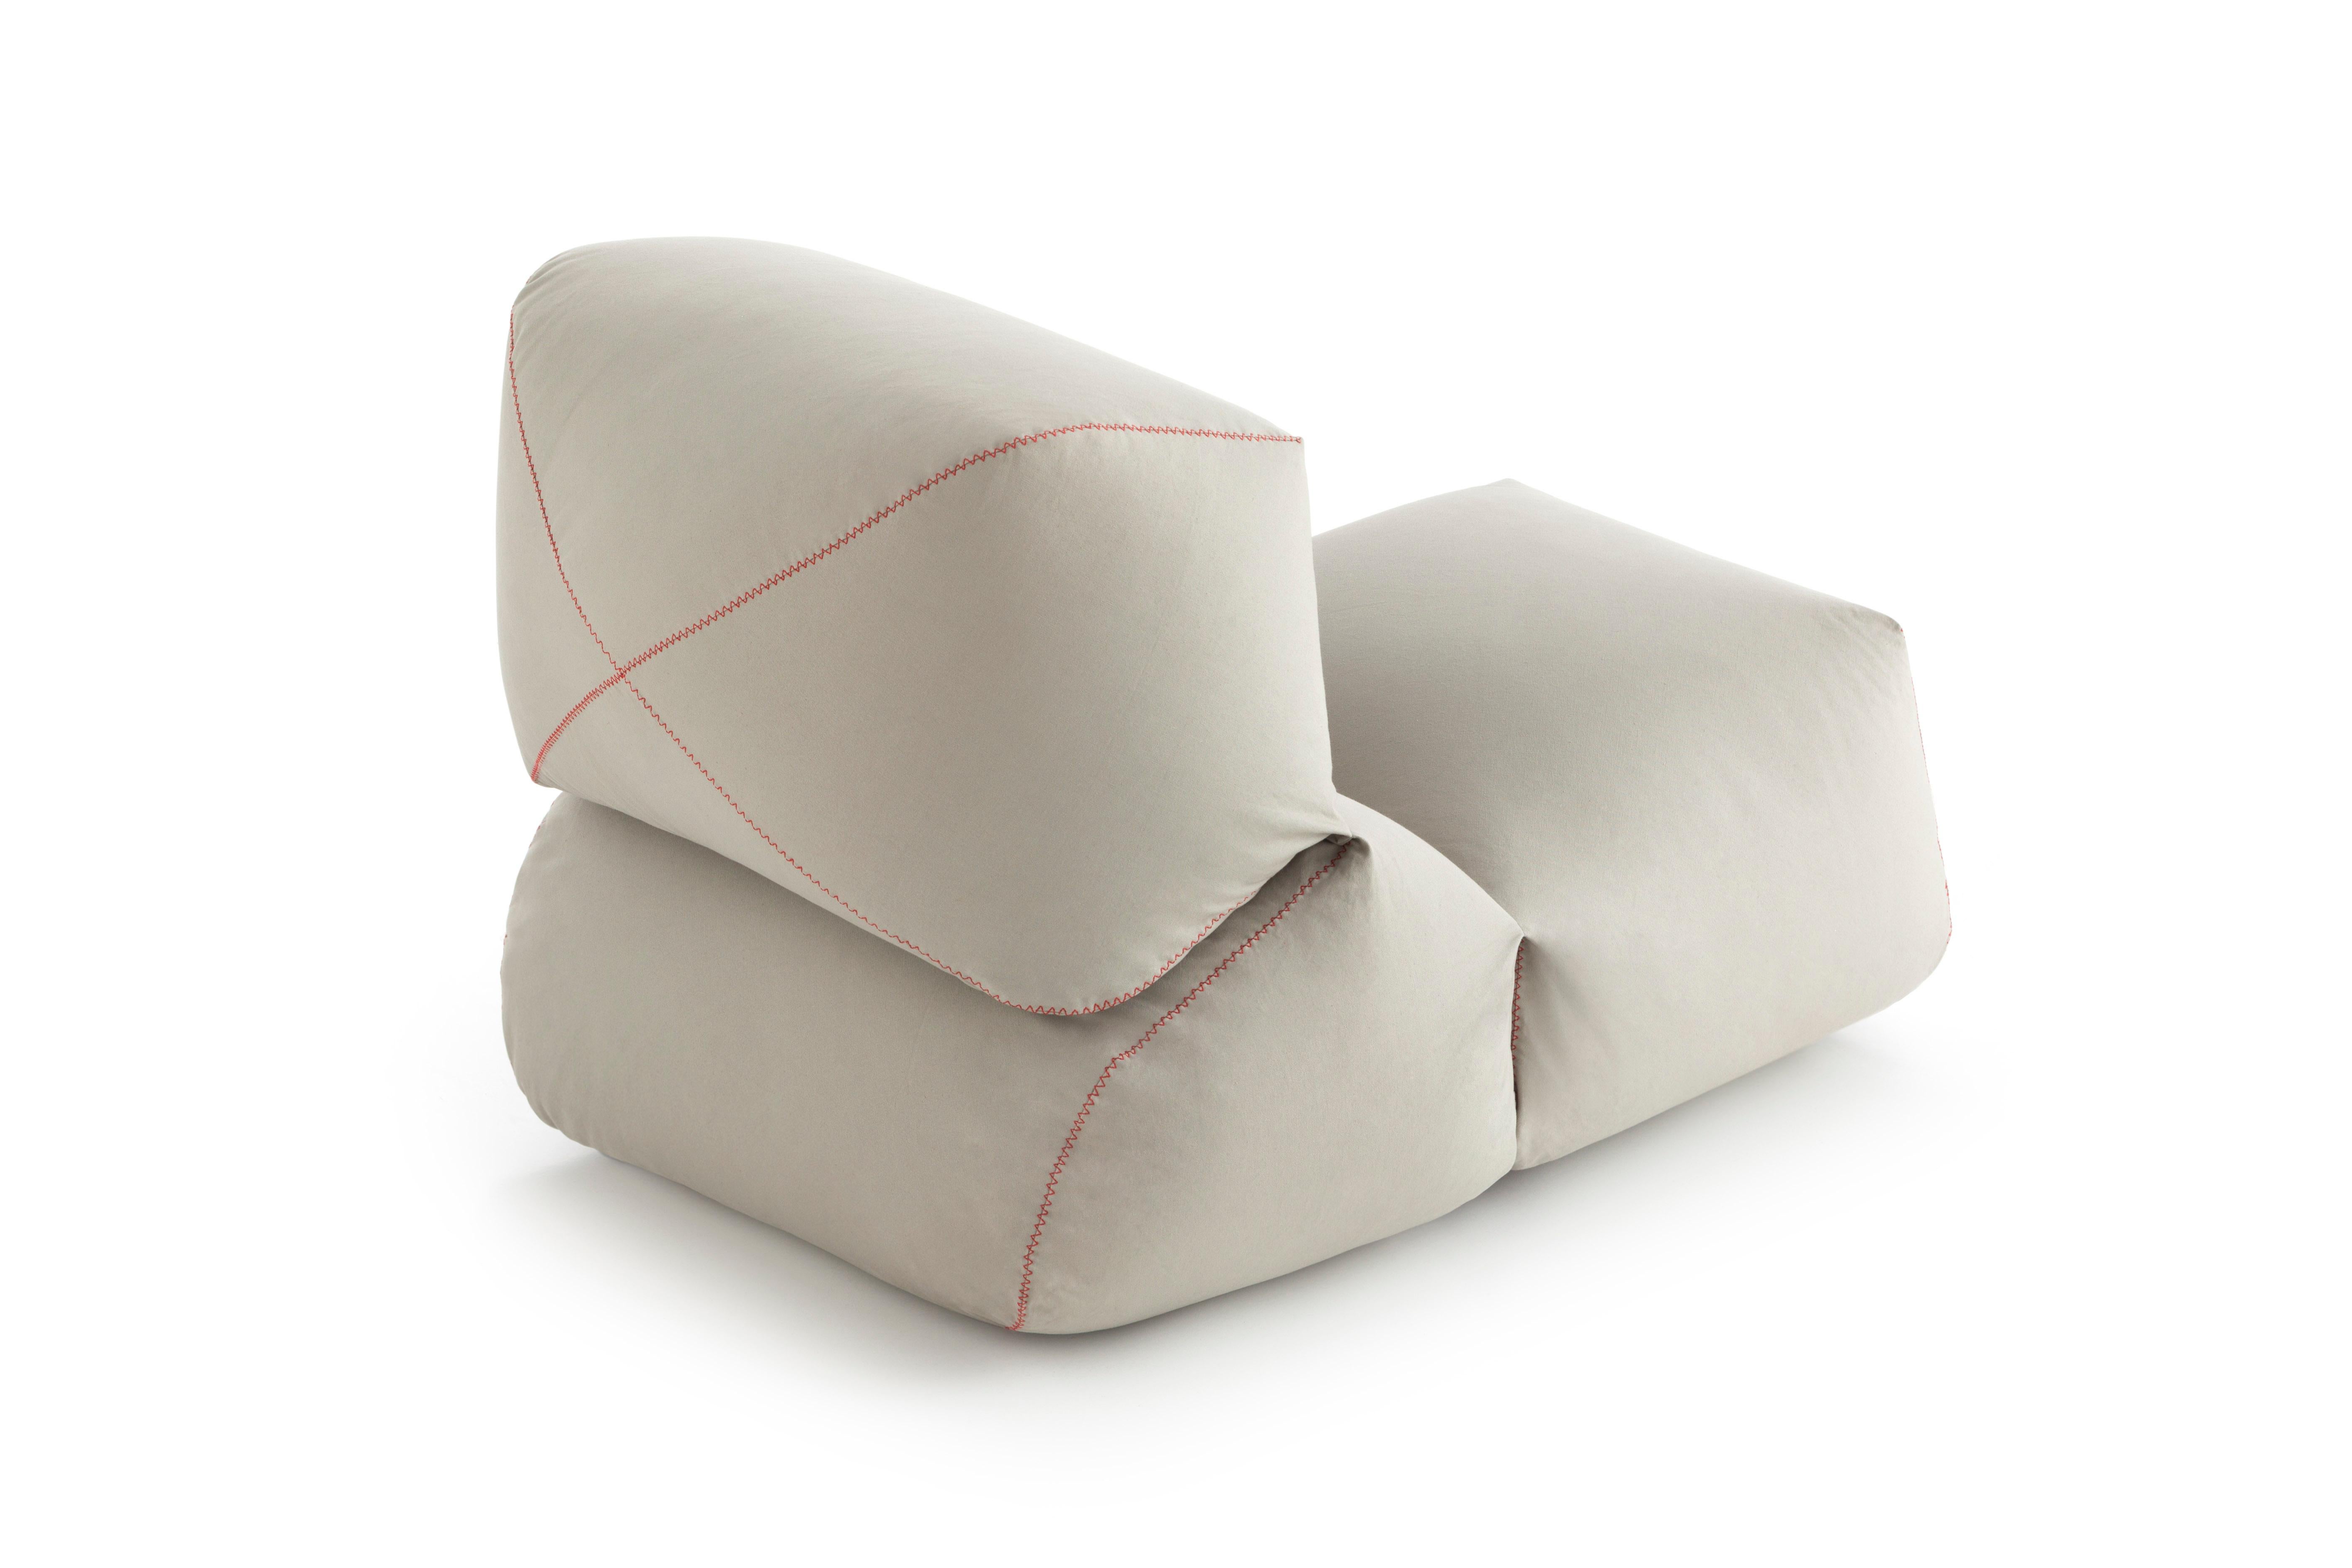 This innovative easychair is available in two different cotton fabrics, canvas and velvet, in five colour choices with reinforced seams with contrasting colours and a filling of polystyrene balls that adapt to body movement. The result an origi- nal